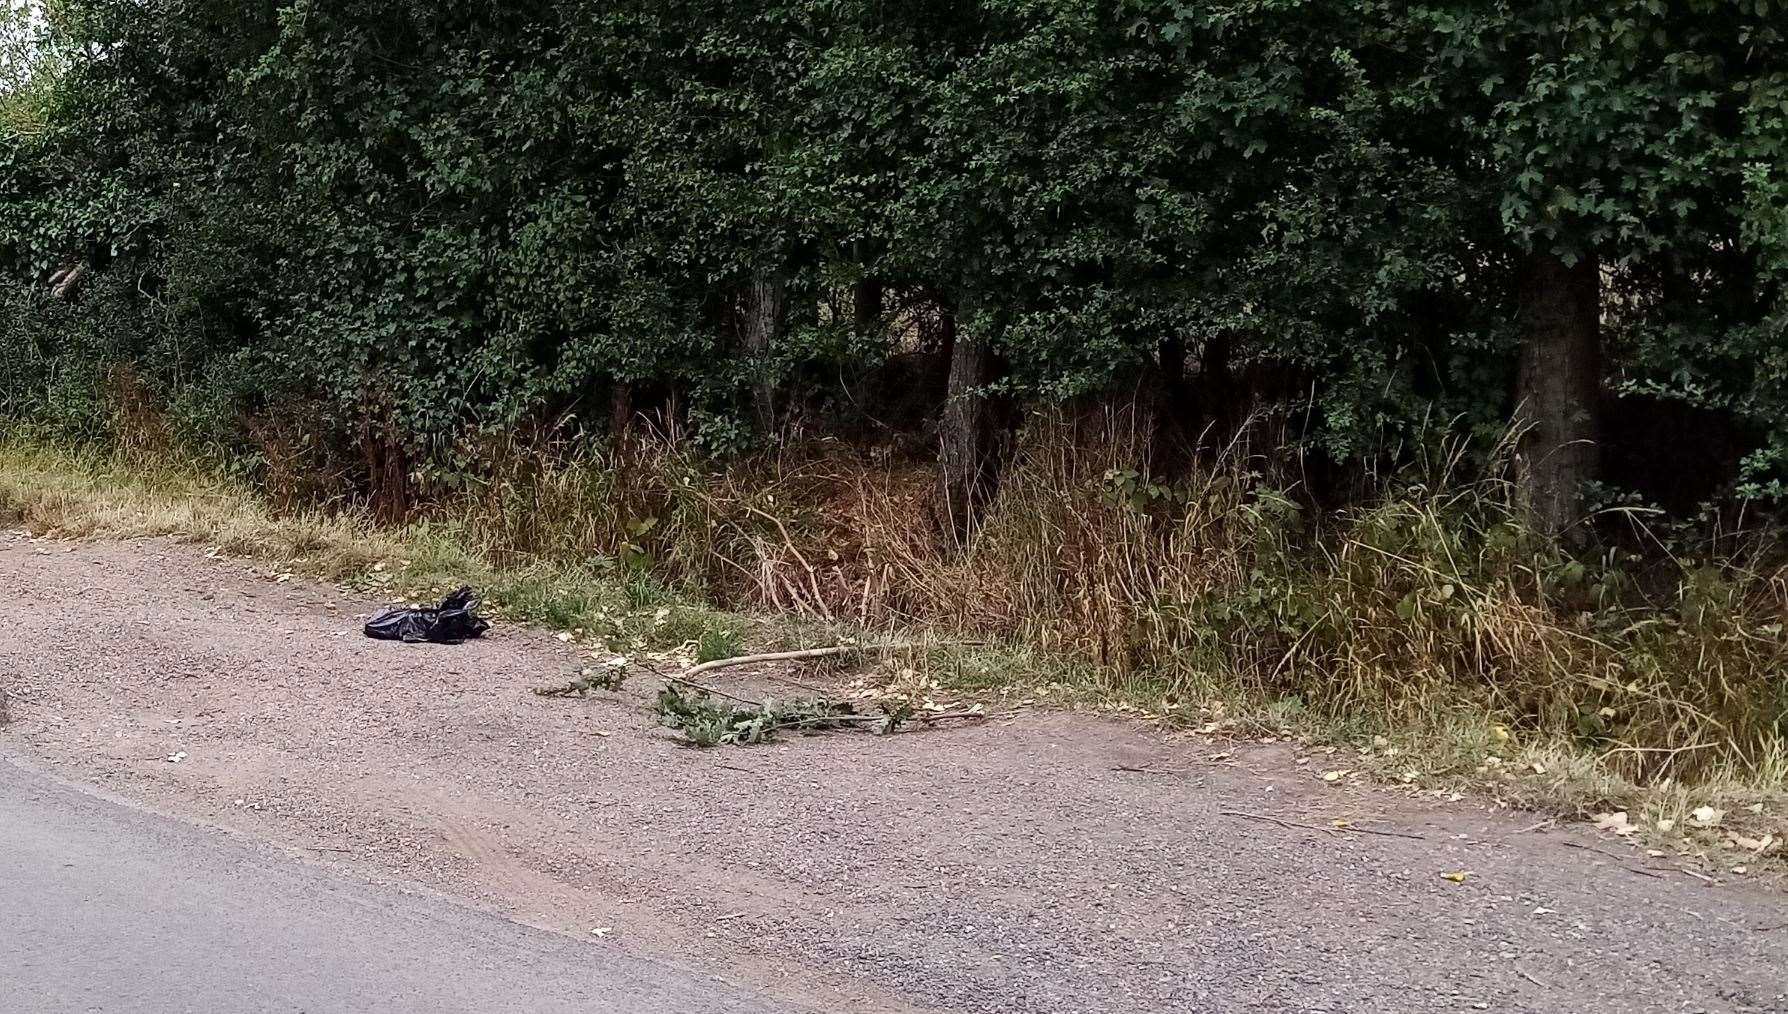 A dead dog was found wrapped in a plastic bag in Plain Road, Marden